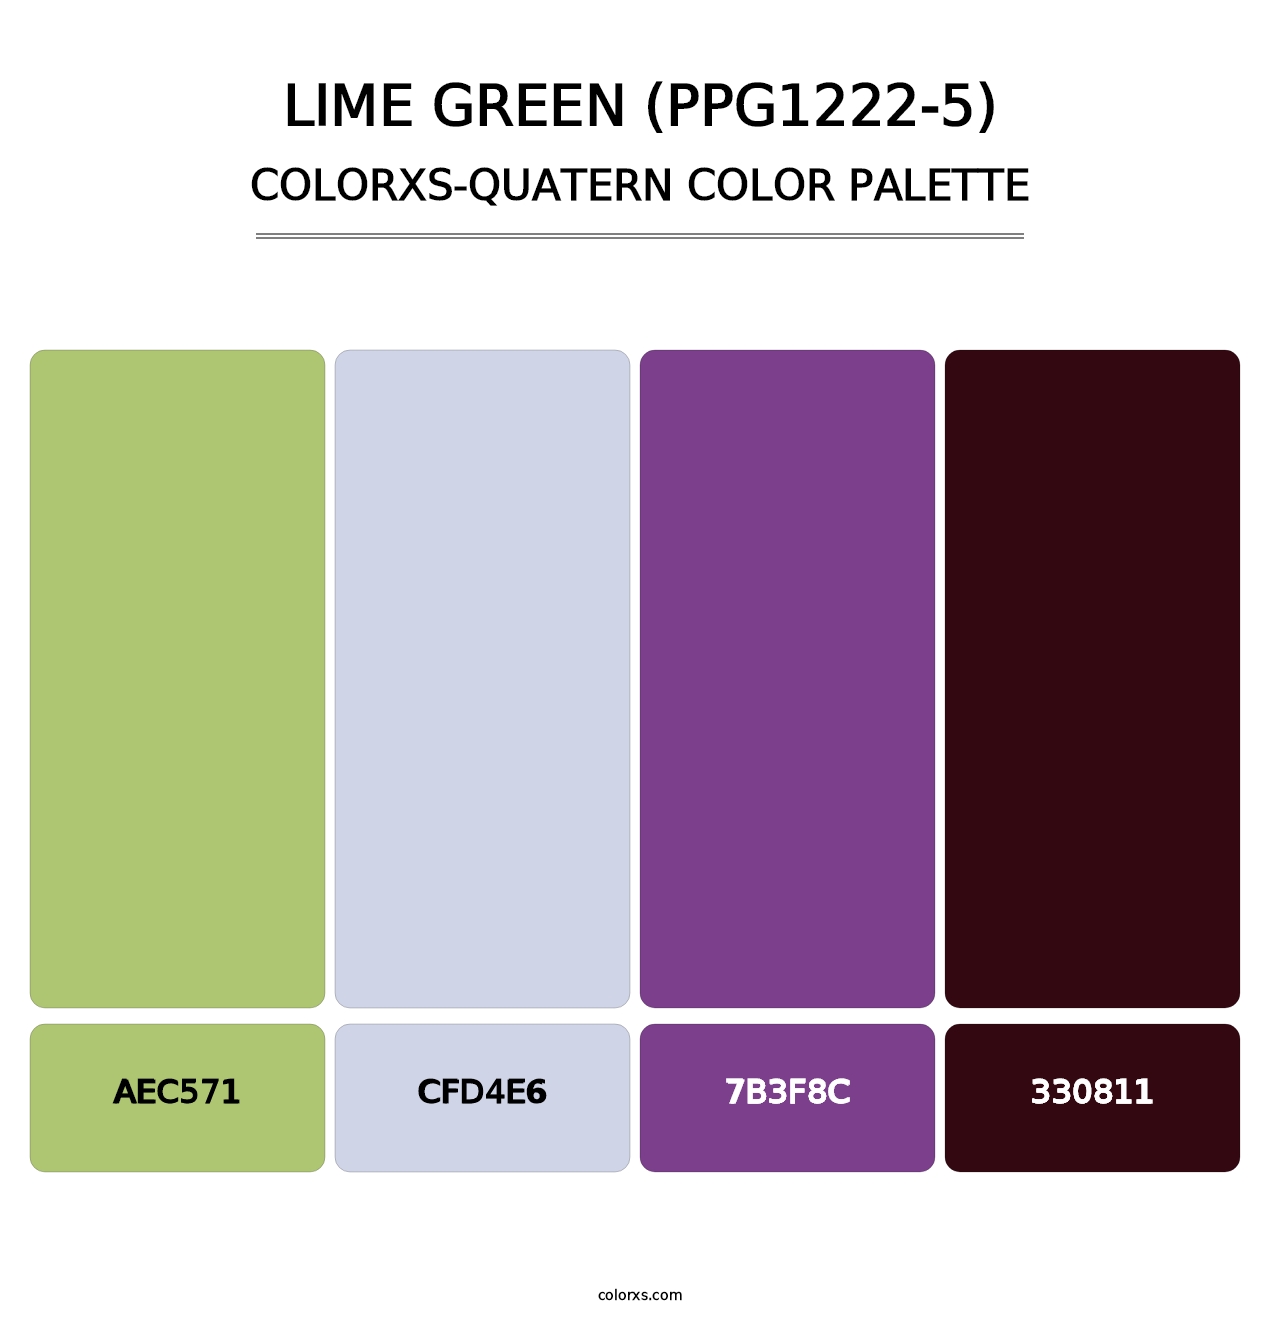 Lime Green (PPG1222-5) - Colorxs Quatern Palette